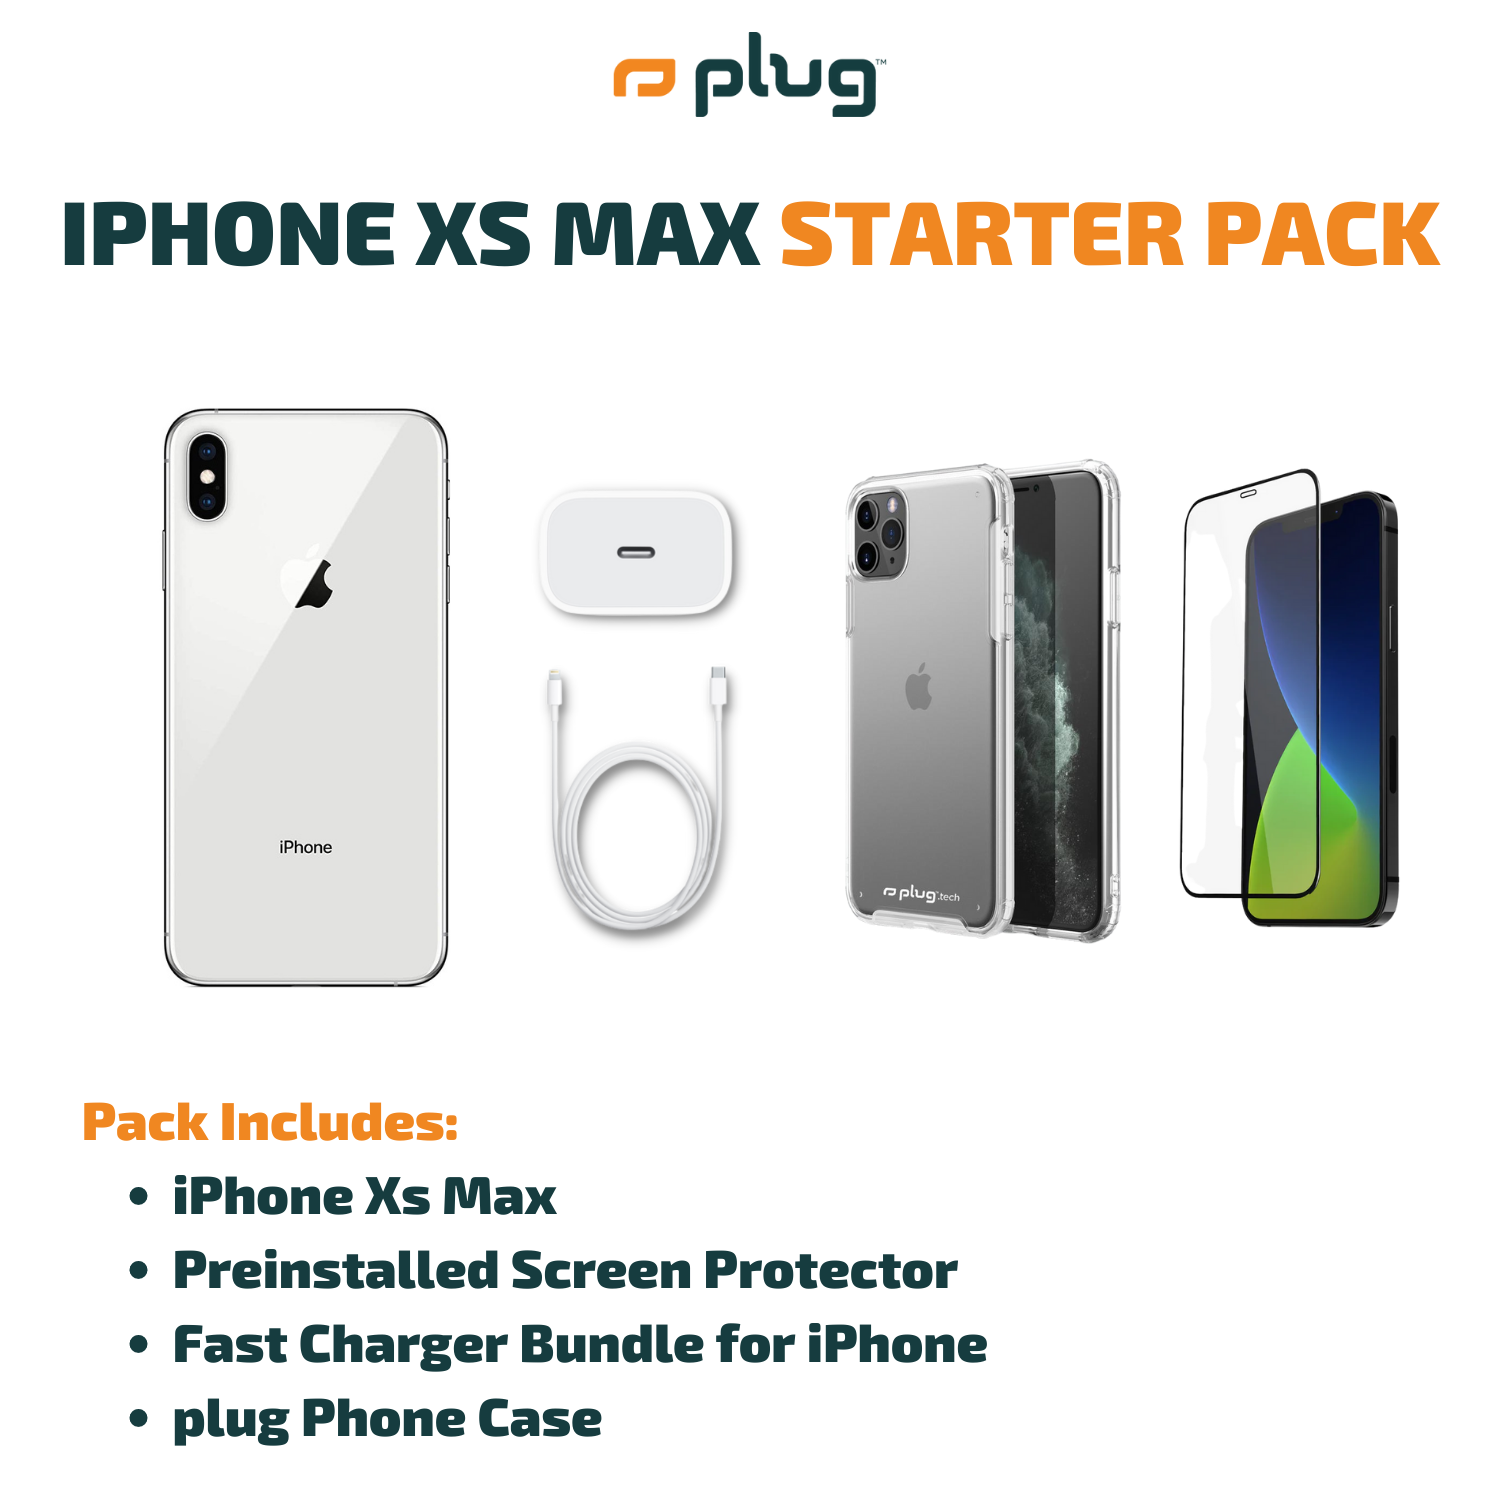 iPhone XS Max 256GB Silver - New battery - Refurbished product